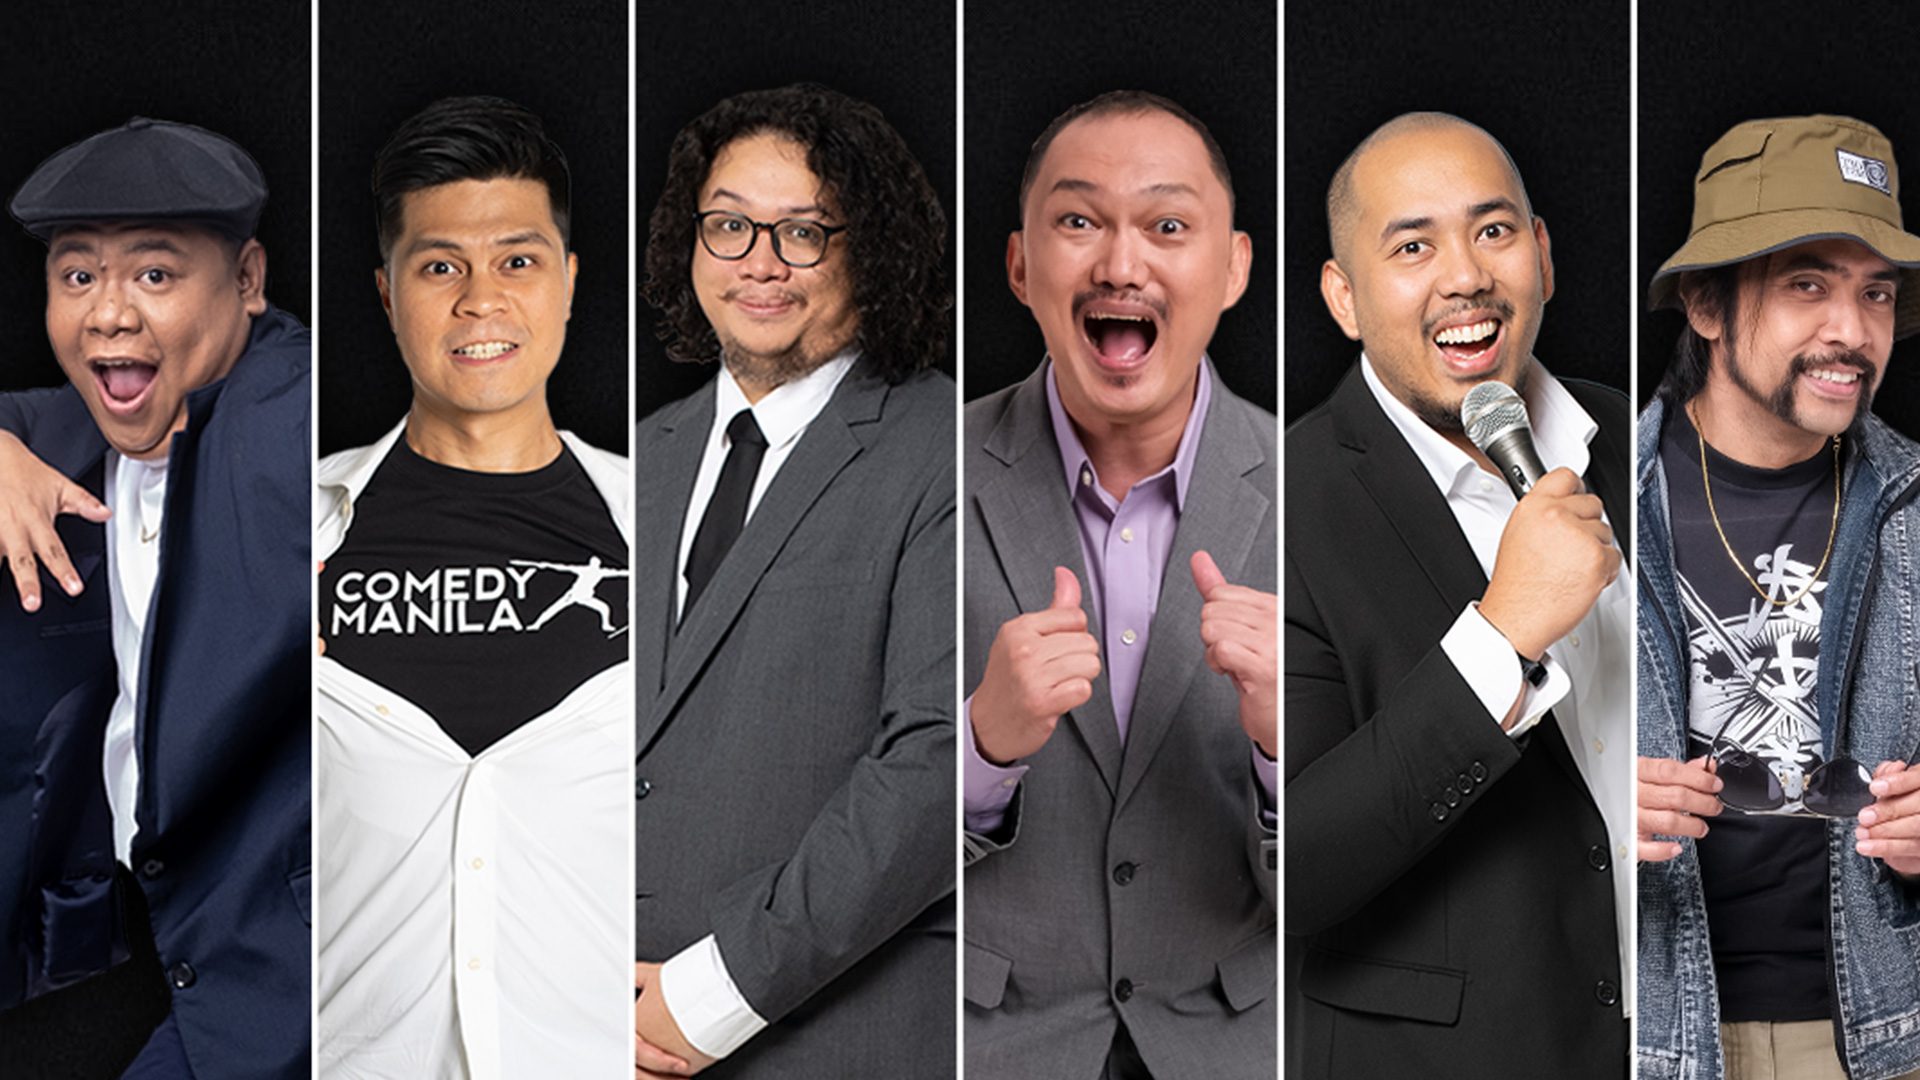 6 of the PH’s top comedians share the stage in The Best of Comedy Manila